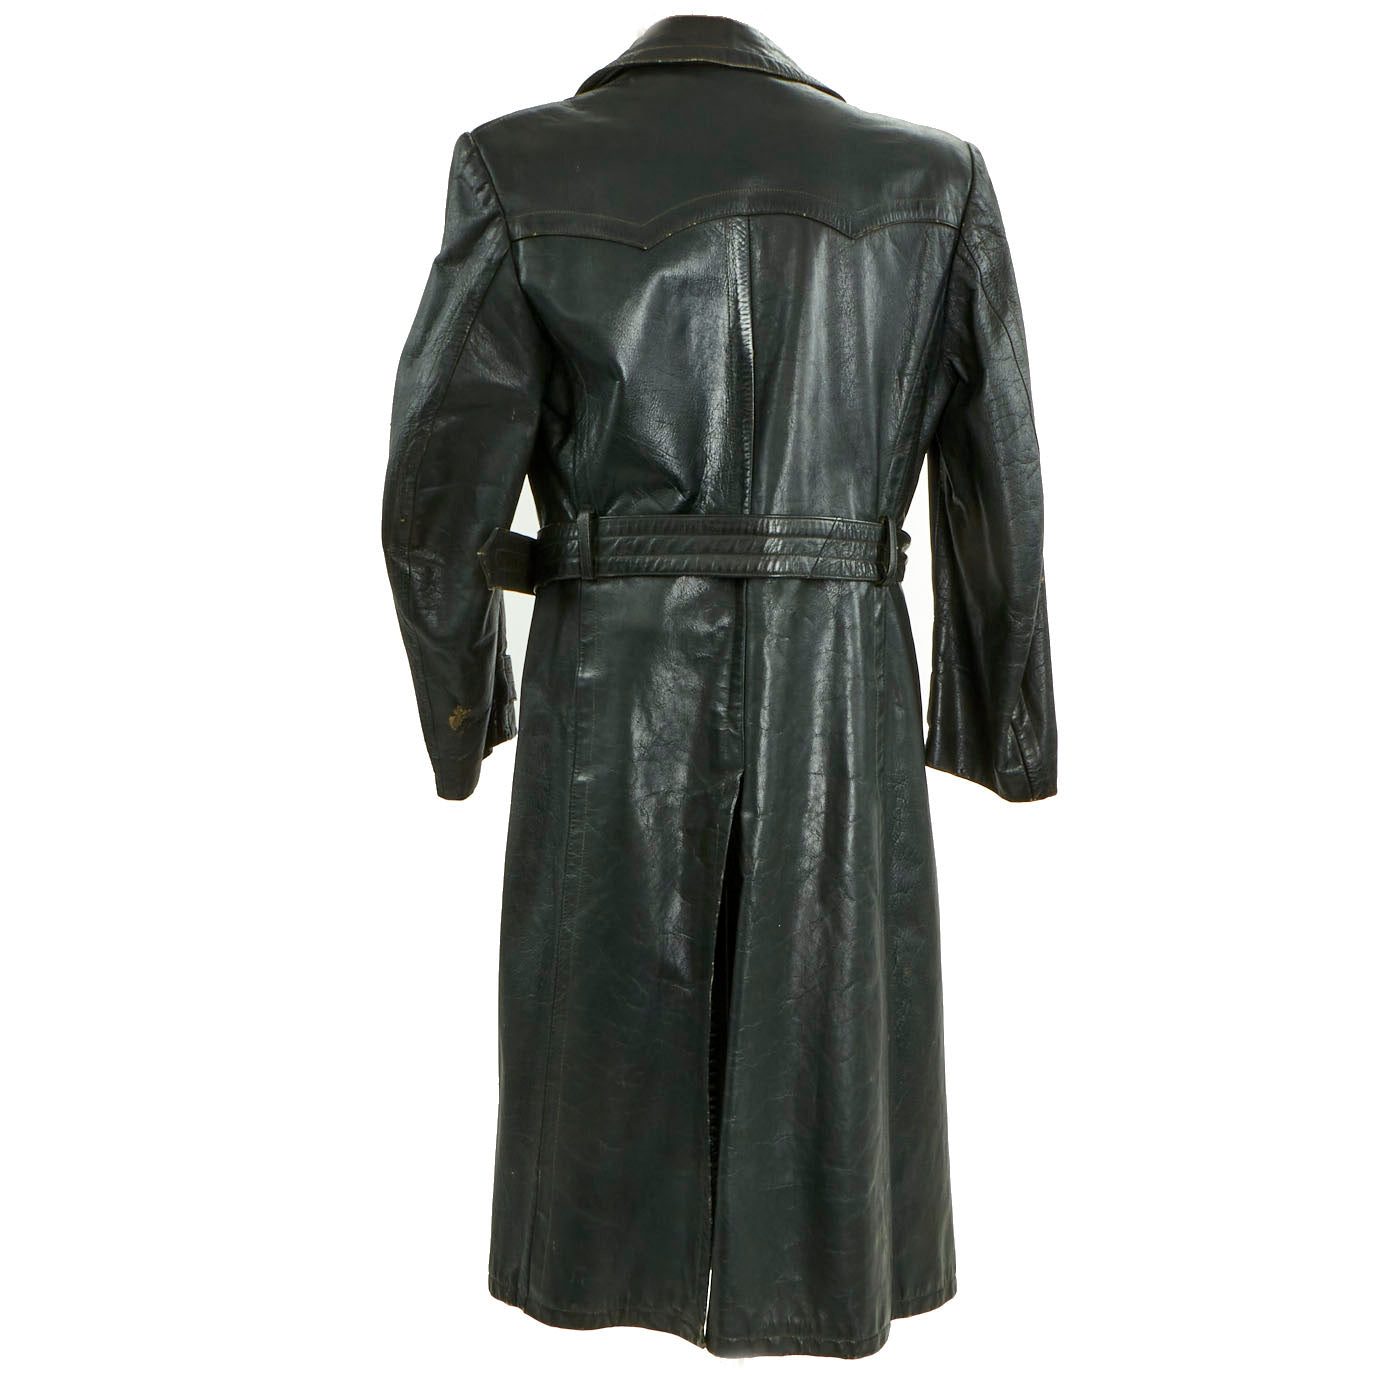 Original German WWII Officer Black Leather Greatcoat by Striwa ...